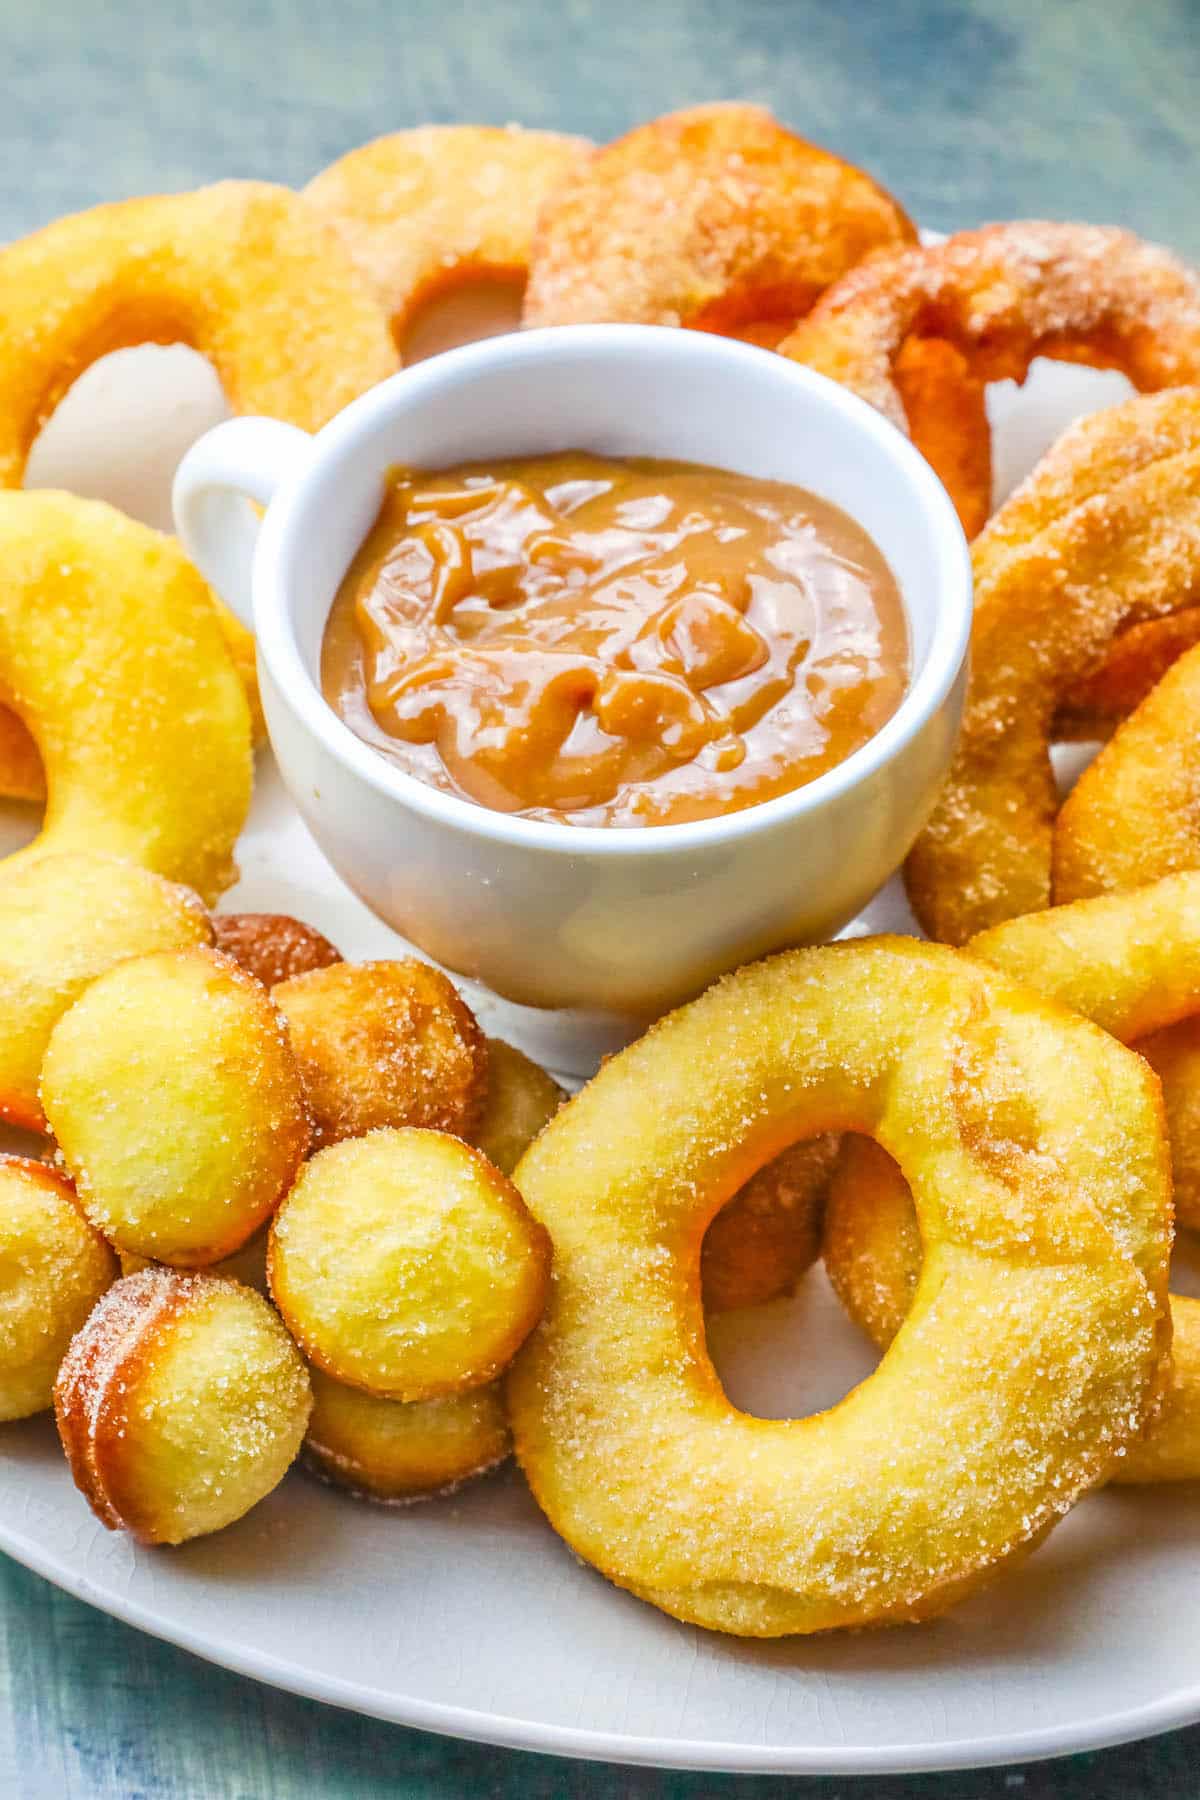 donuts and donut holes around caramel